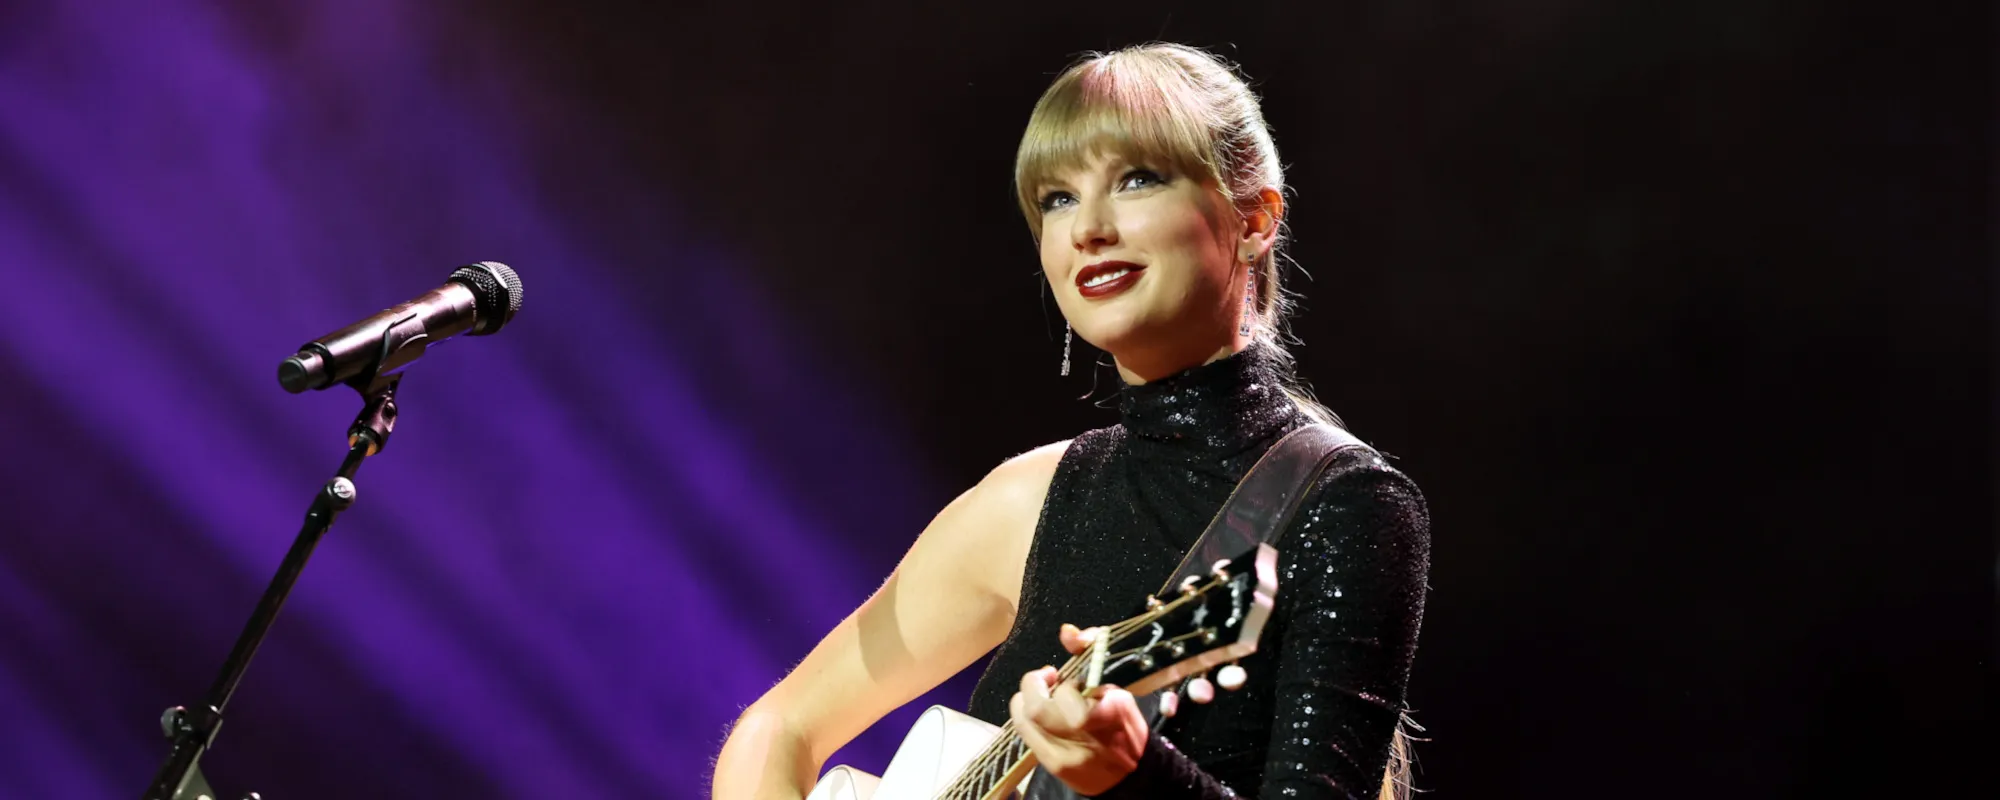 We’re Getting ‘Speak Now (Taylor’s Version)’ Next – and it Might Be Sooner Than We Think